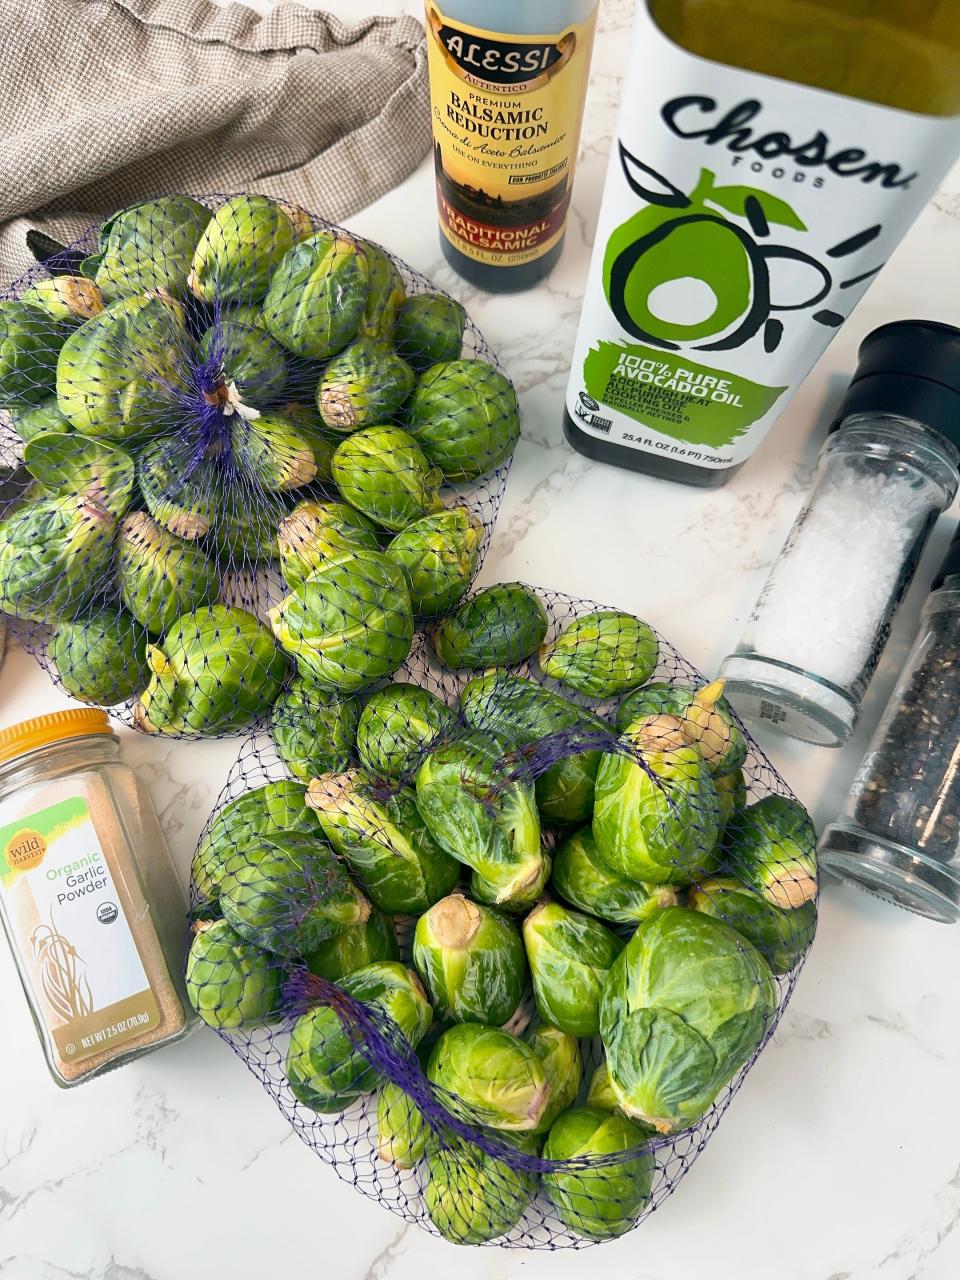 Making the best brussels sprouts requires only a few pantry staples.